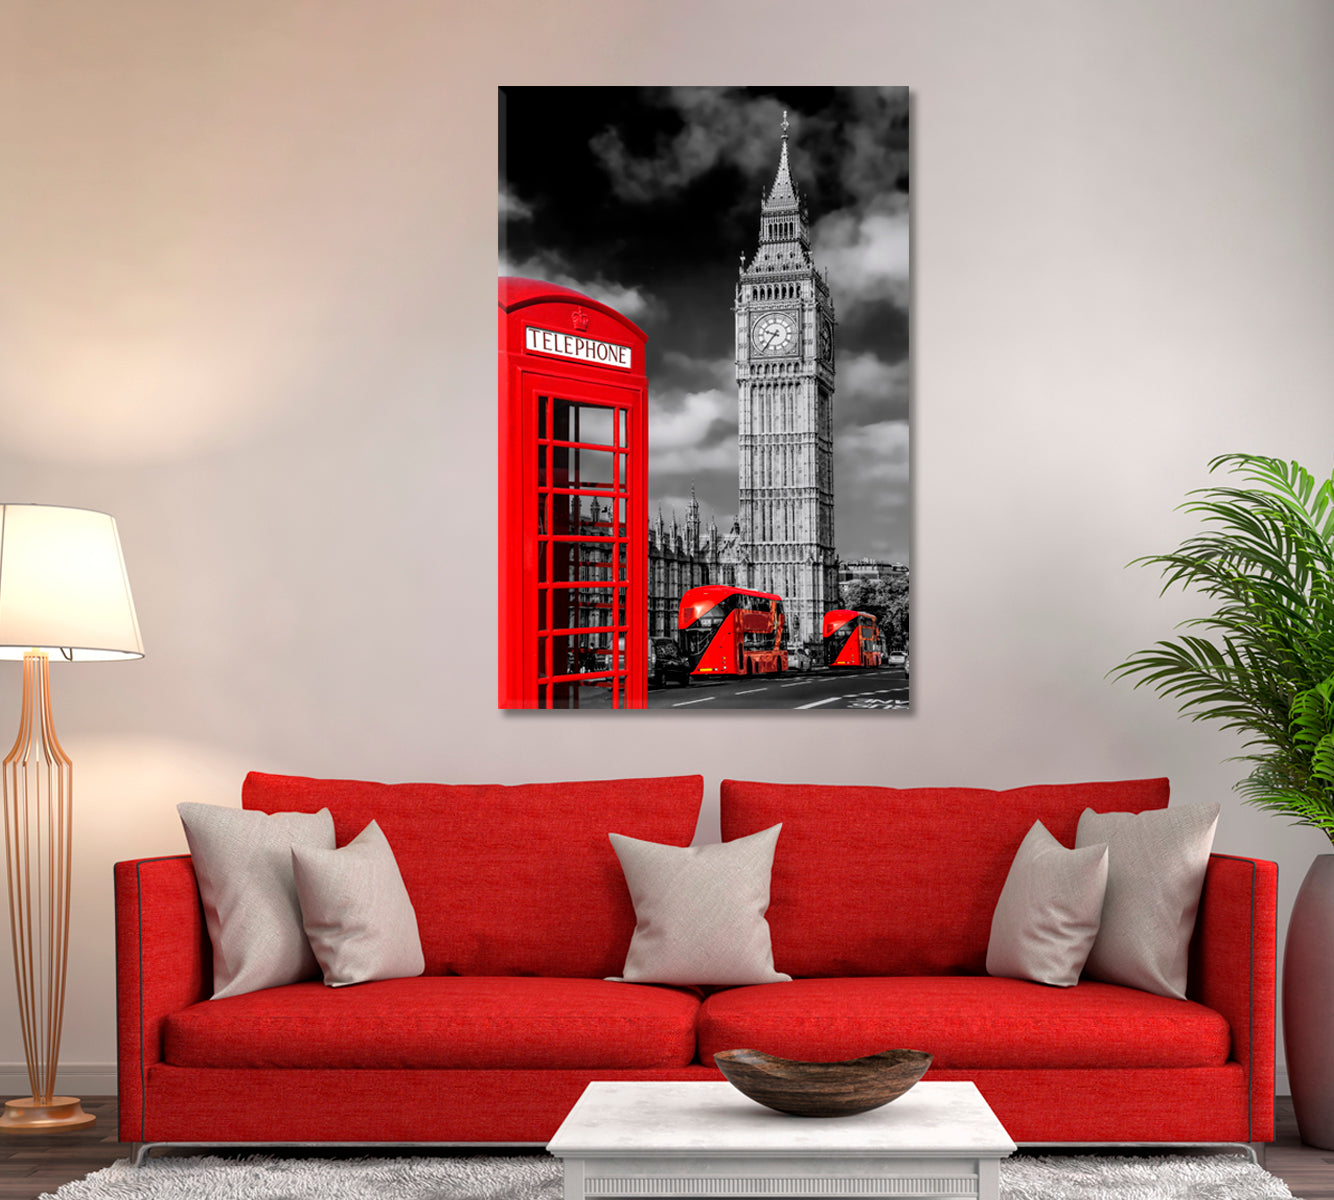 London Symbols Big Ben Double Decker Buses and Red Telephone Booth Canvas Print ArtLexy   